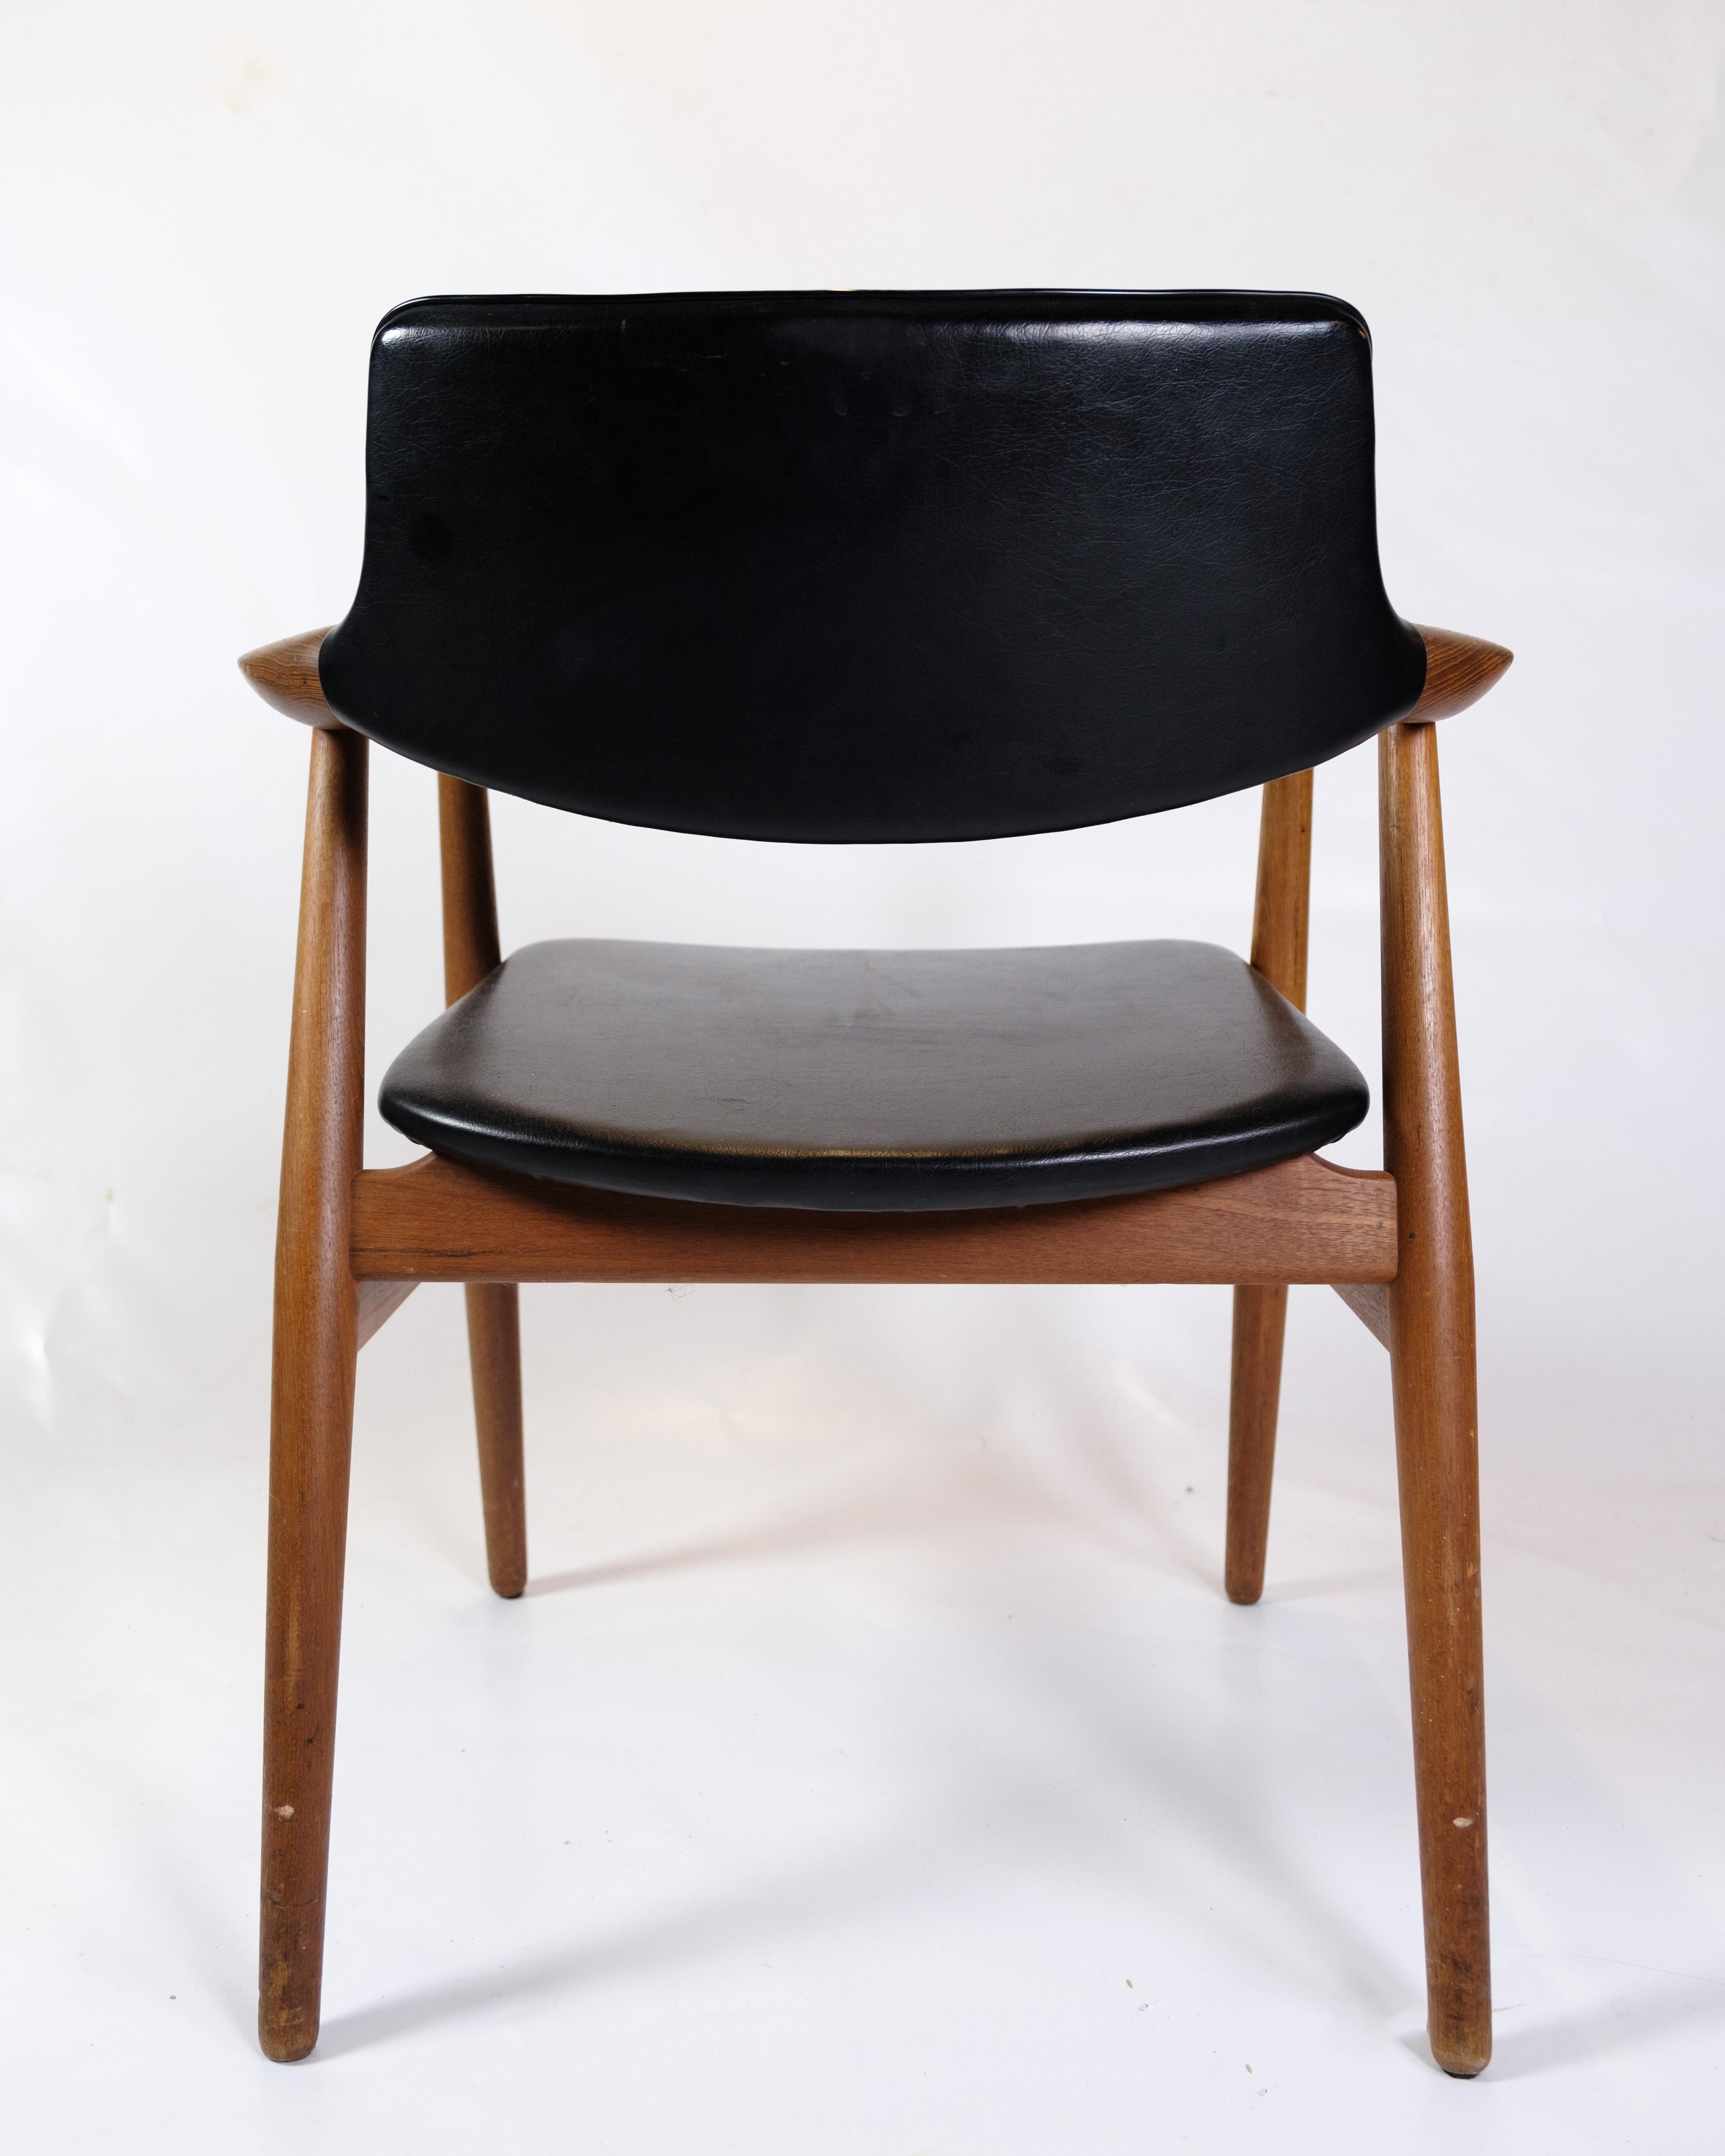 Leather Armchair With Stool Model GM11 Chair By Svend E. Andersen From 1960s For Sale